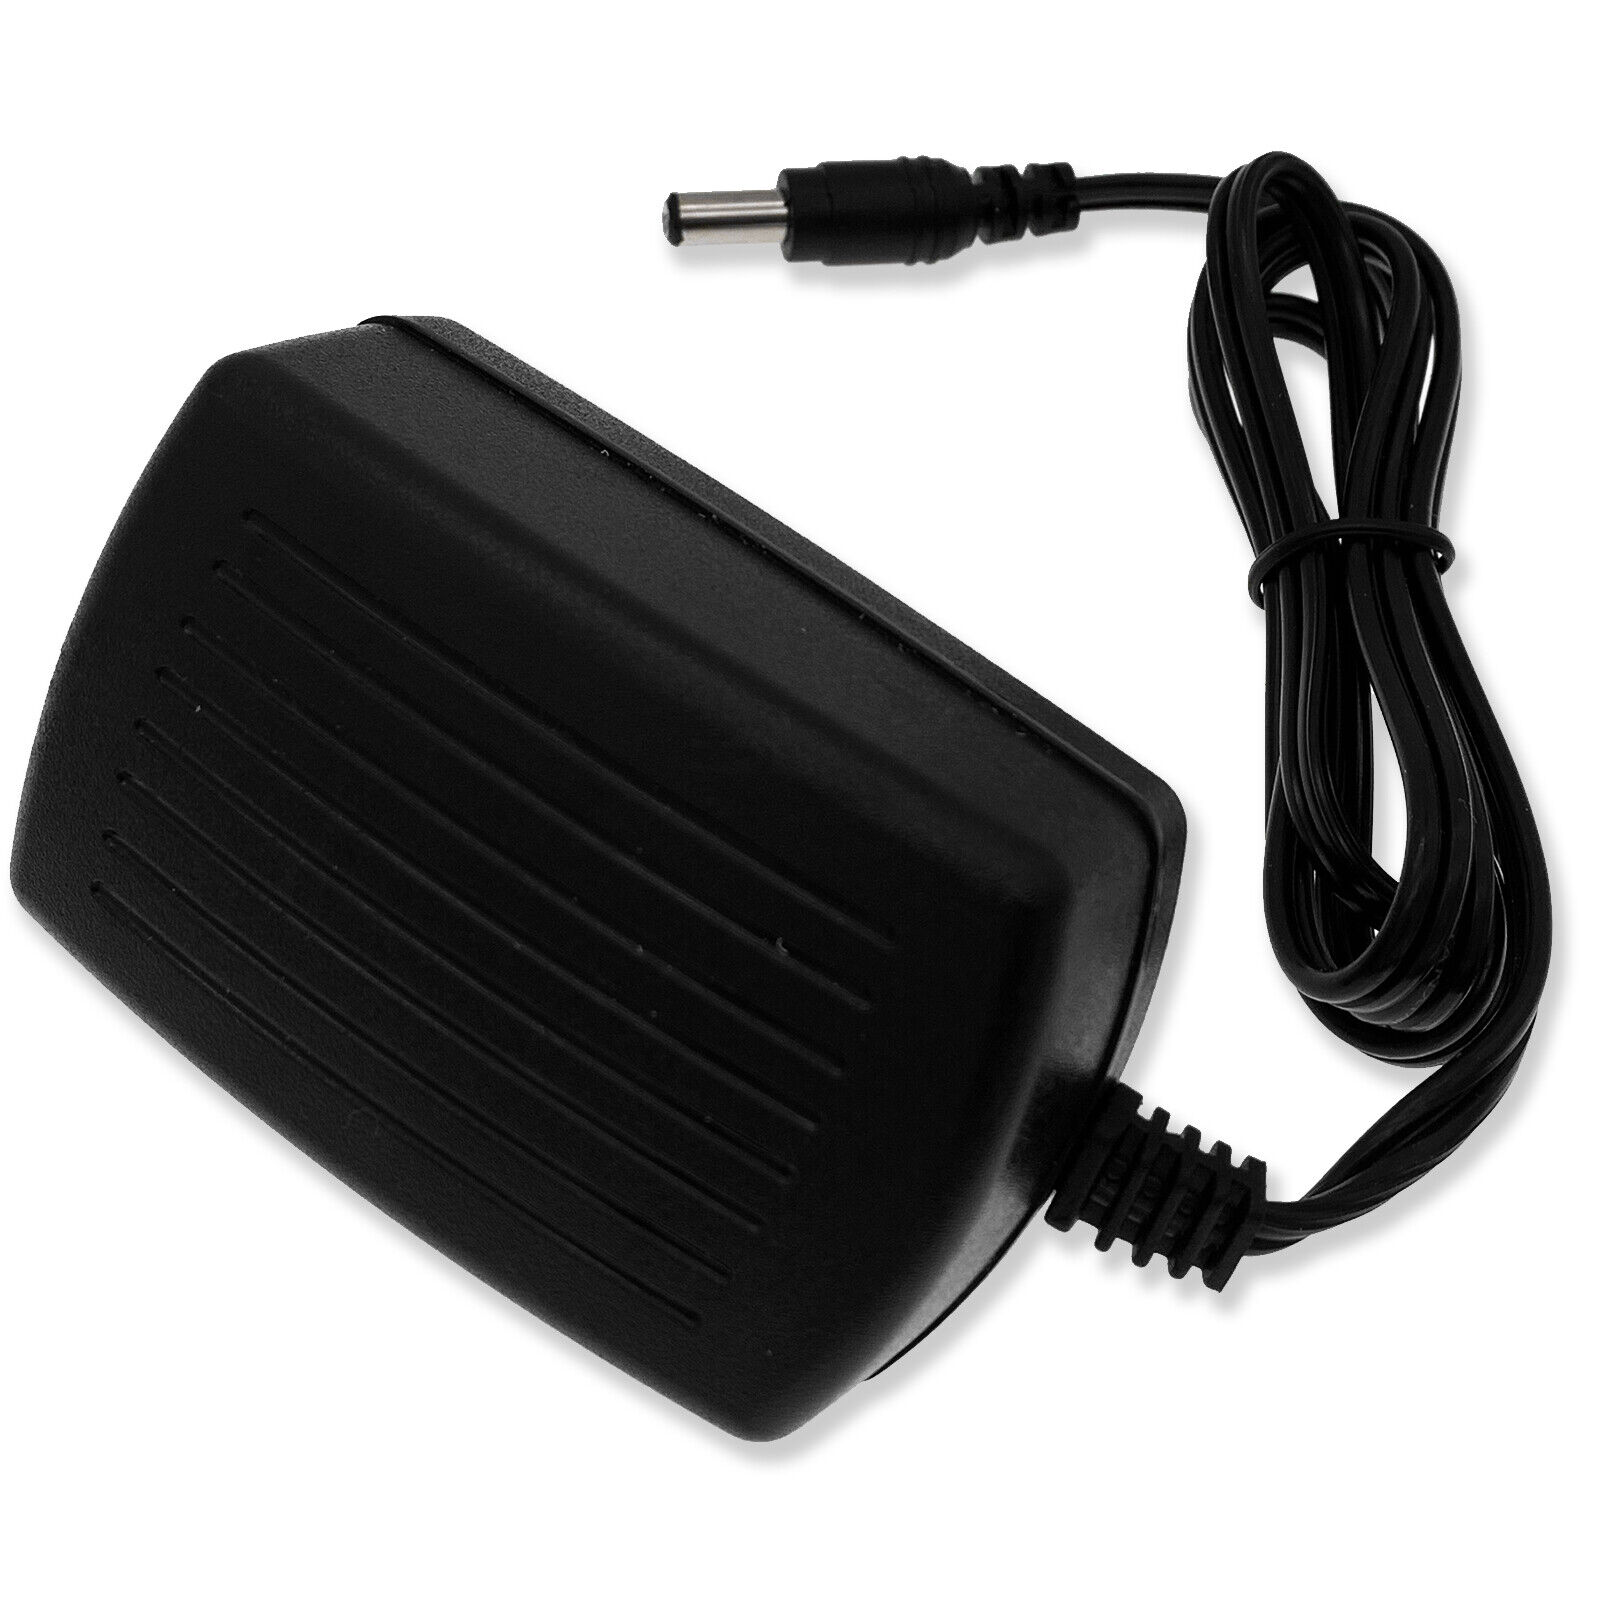 12V AC/DC Adapter For Ion Classic LP, Max LP Conversion Turntable Power Supply Connection Split/Duplication 1:2 Type AC